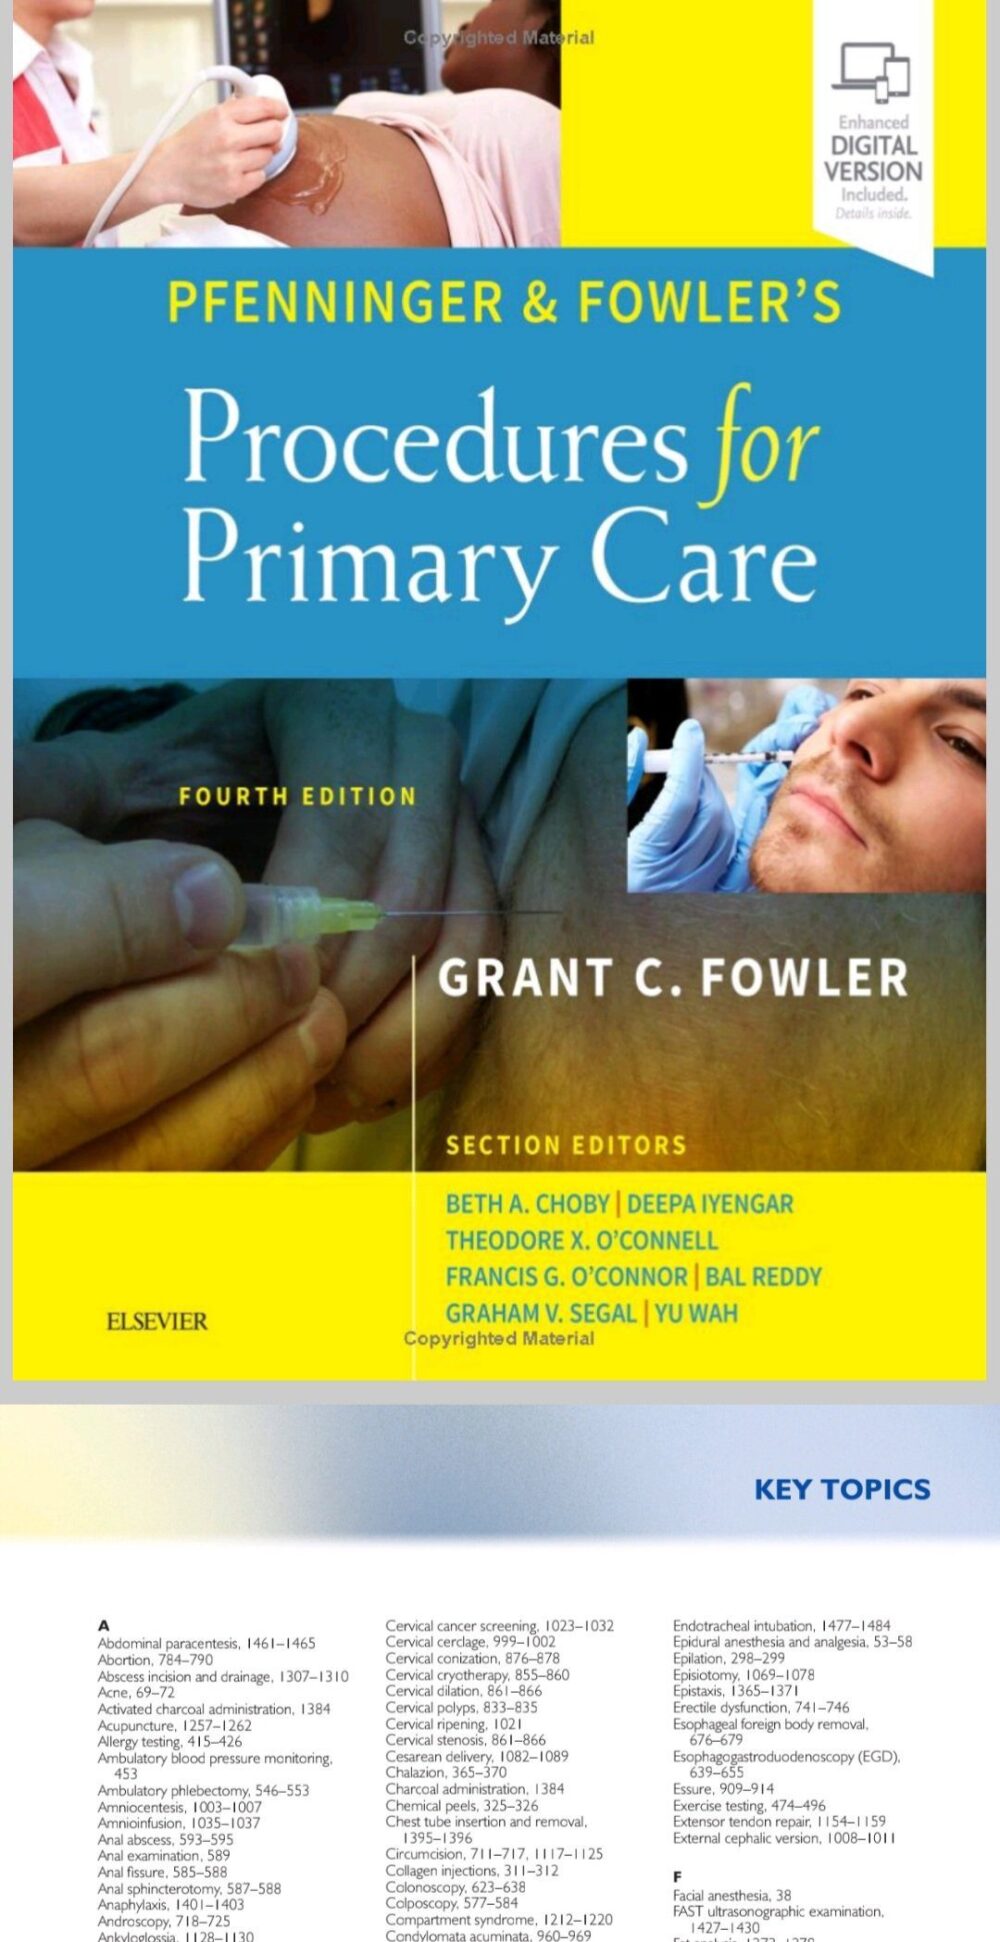 Pfenninger and Fowler's Procedures for Primary Care 4th Edition 2 148397